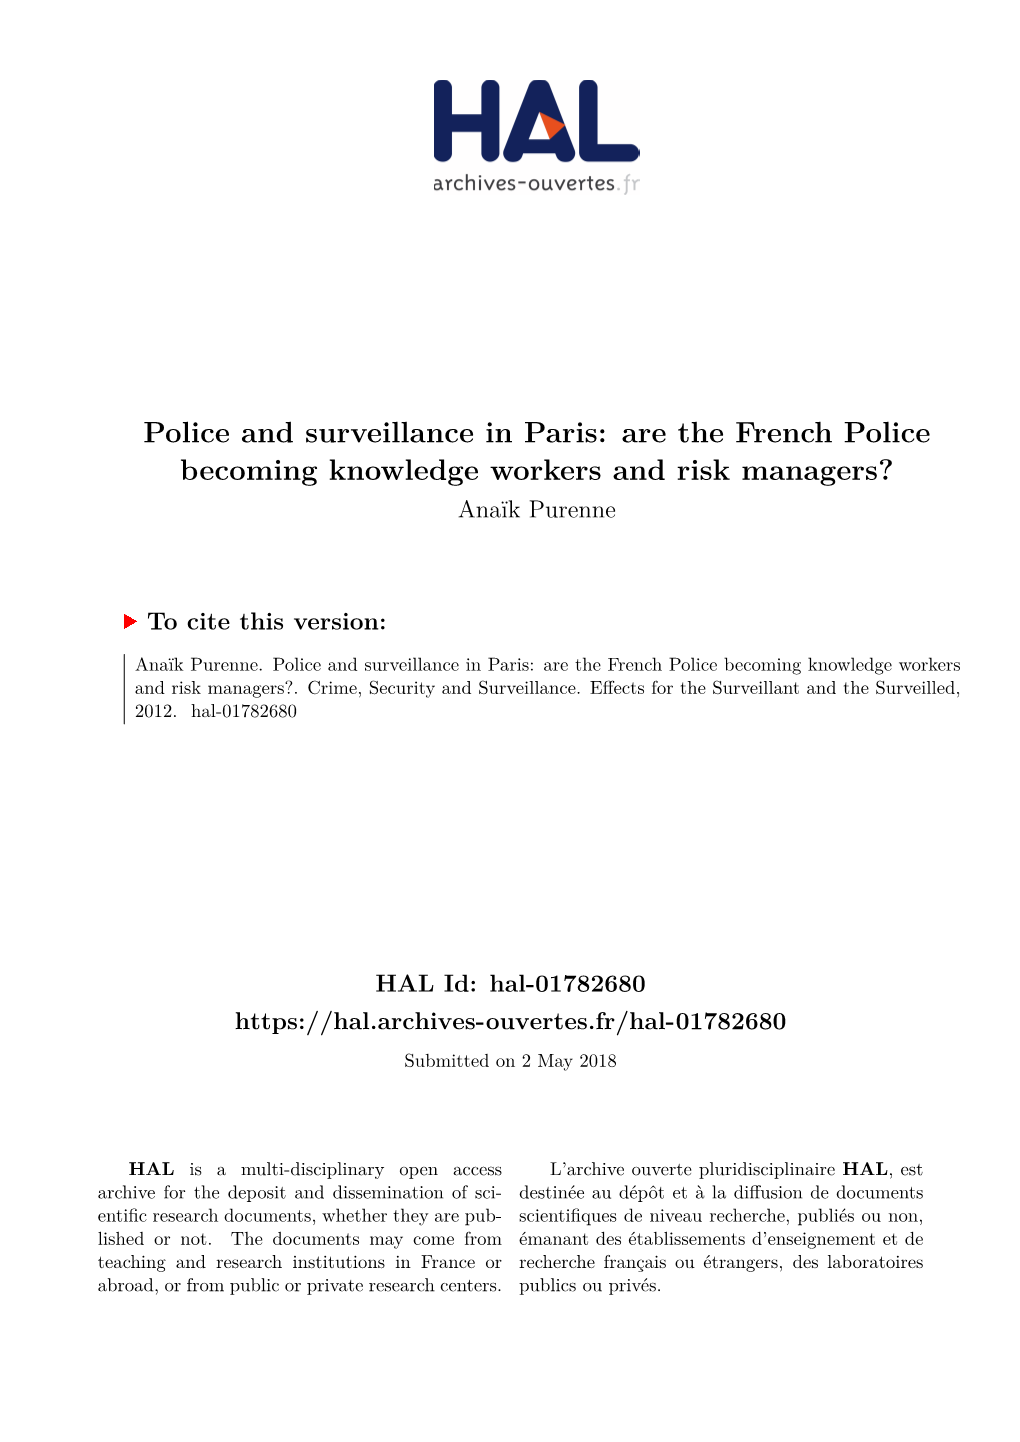 Police and Surveillance in Paris: Are the French Police Becoming Knowledge Workers and Risk Managers? Anaïk Purenne